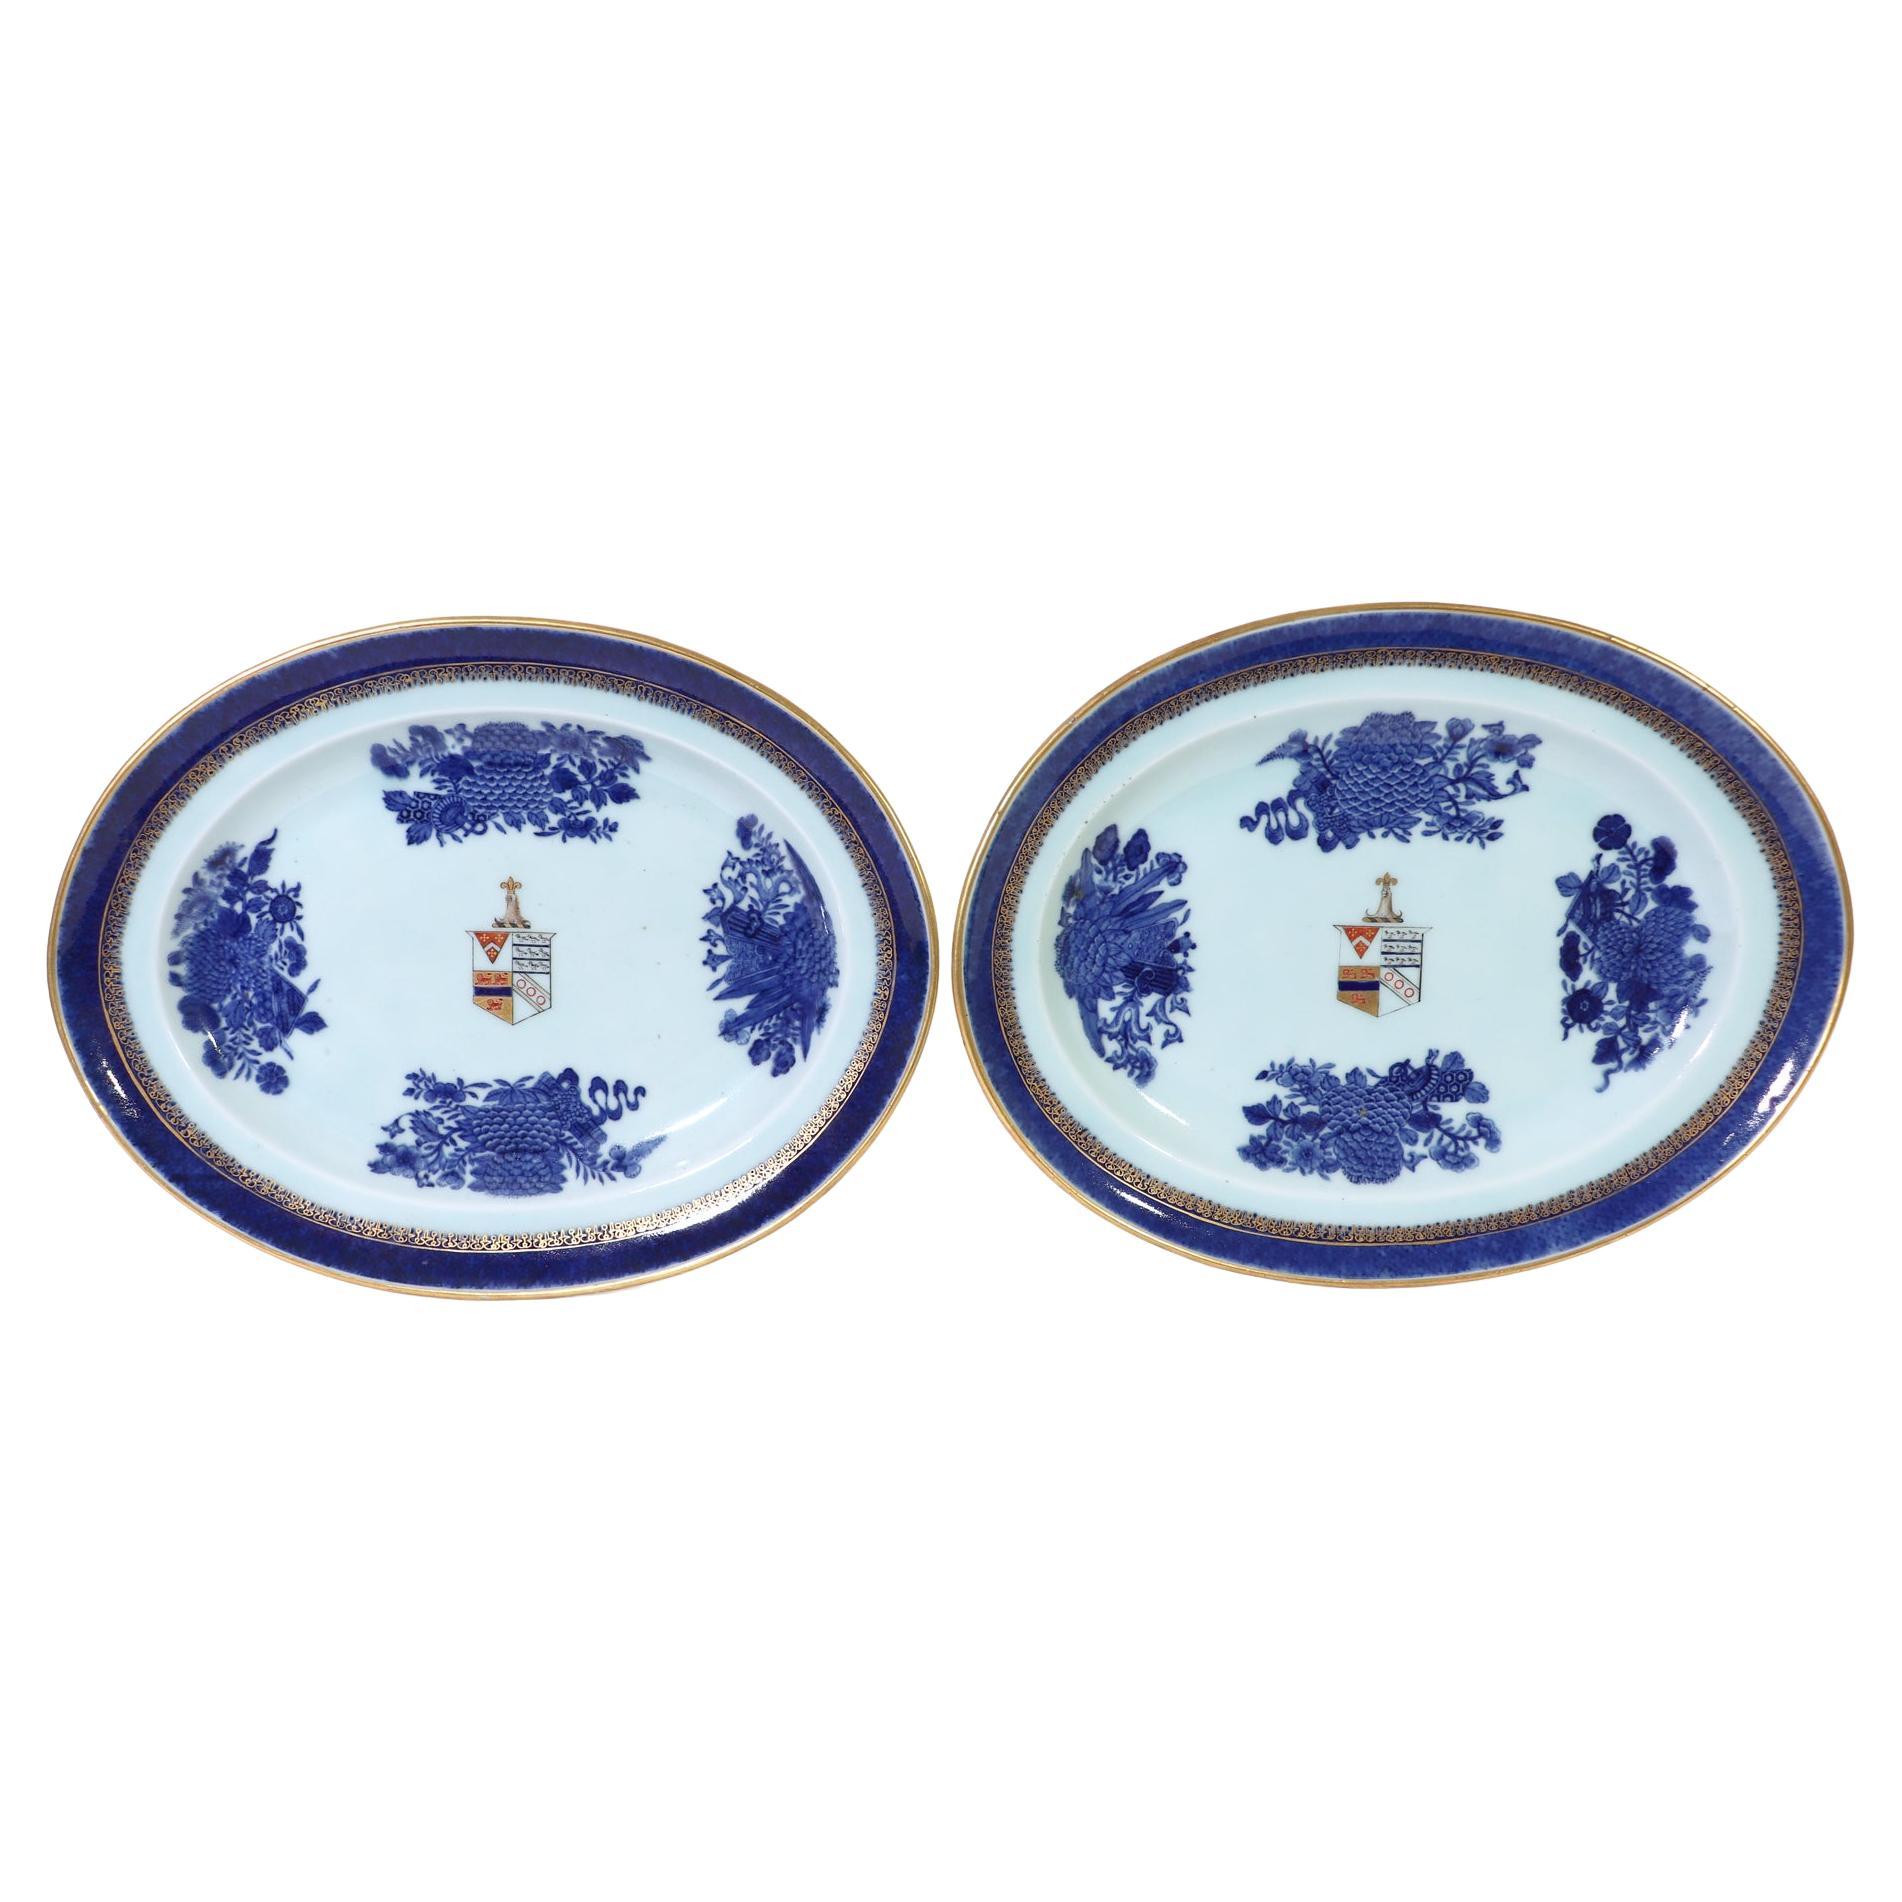 Chinese Export Fitzhugh Armorial Dishes, Arms of Hill Dawe of Ditcheat House